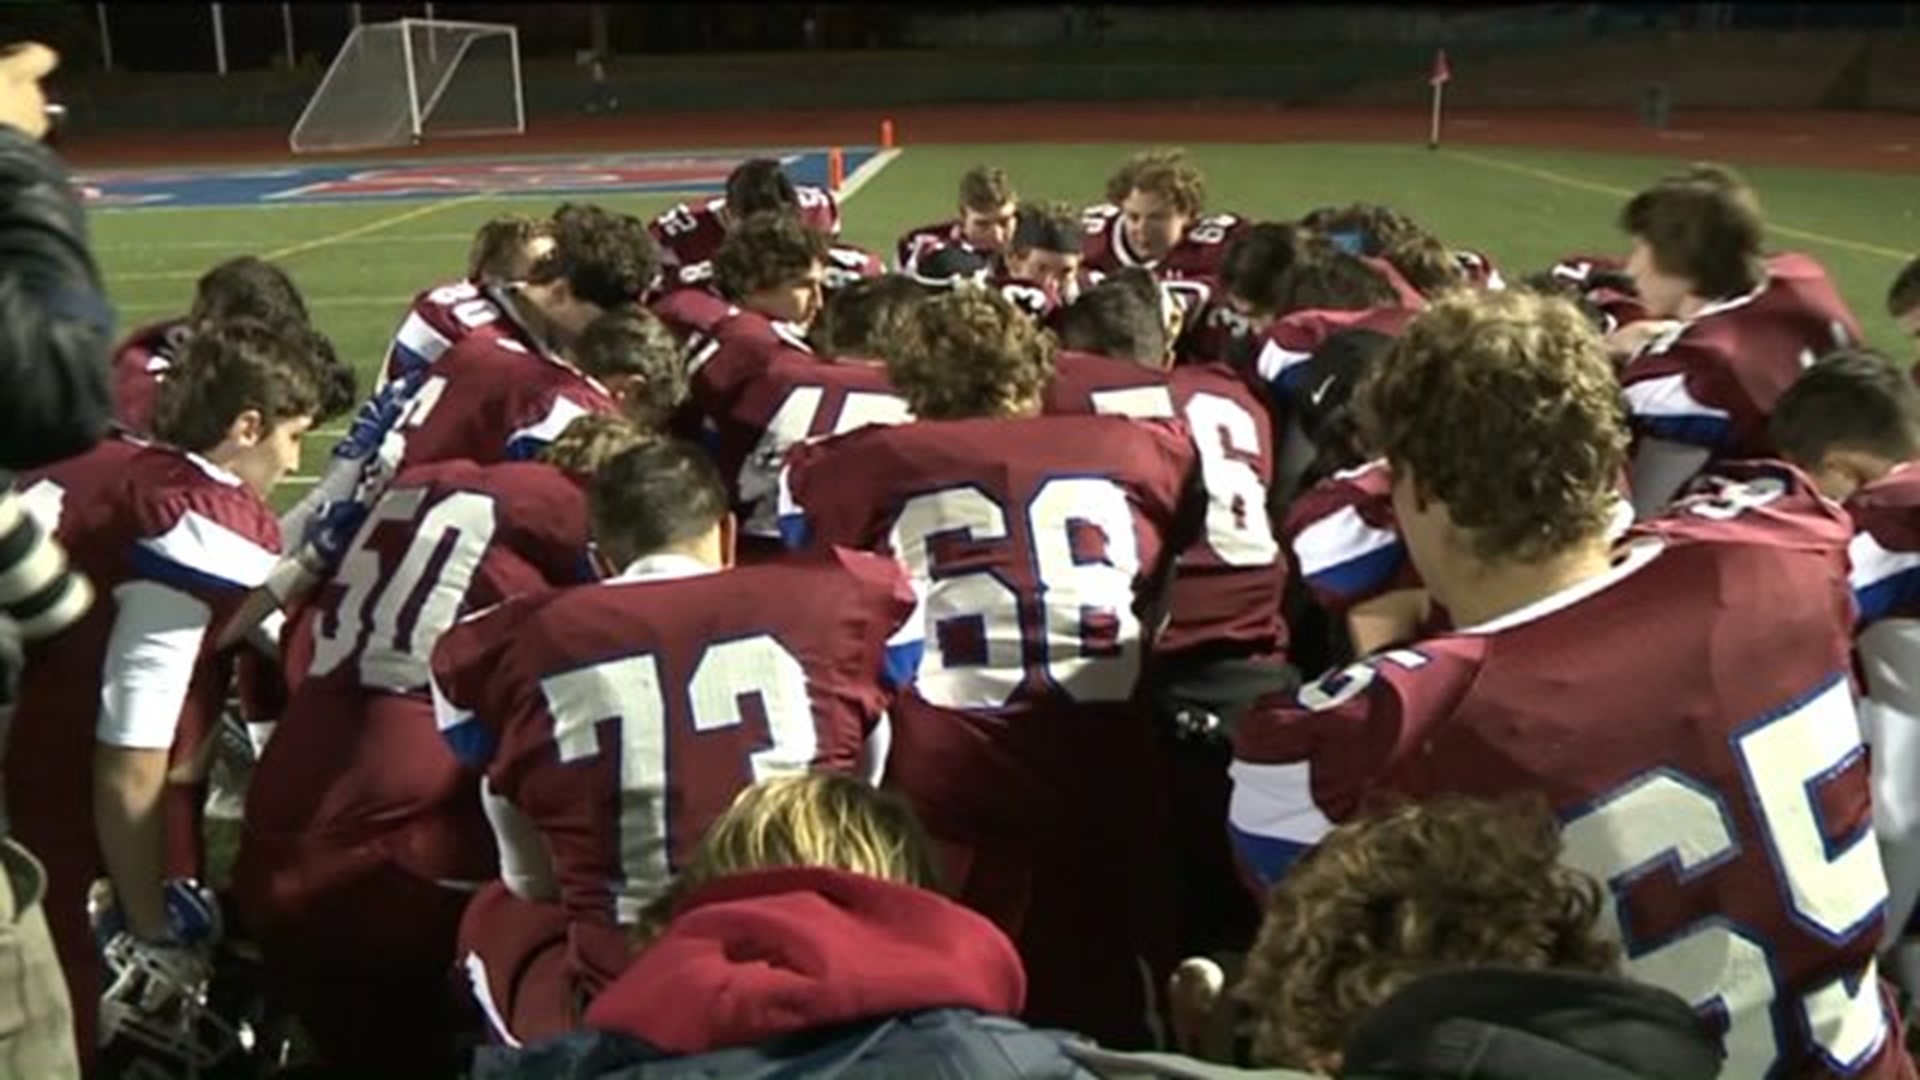 In Dunmore, The Team Prays On